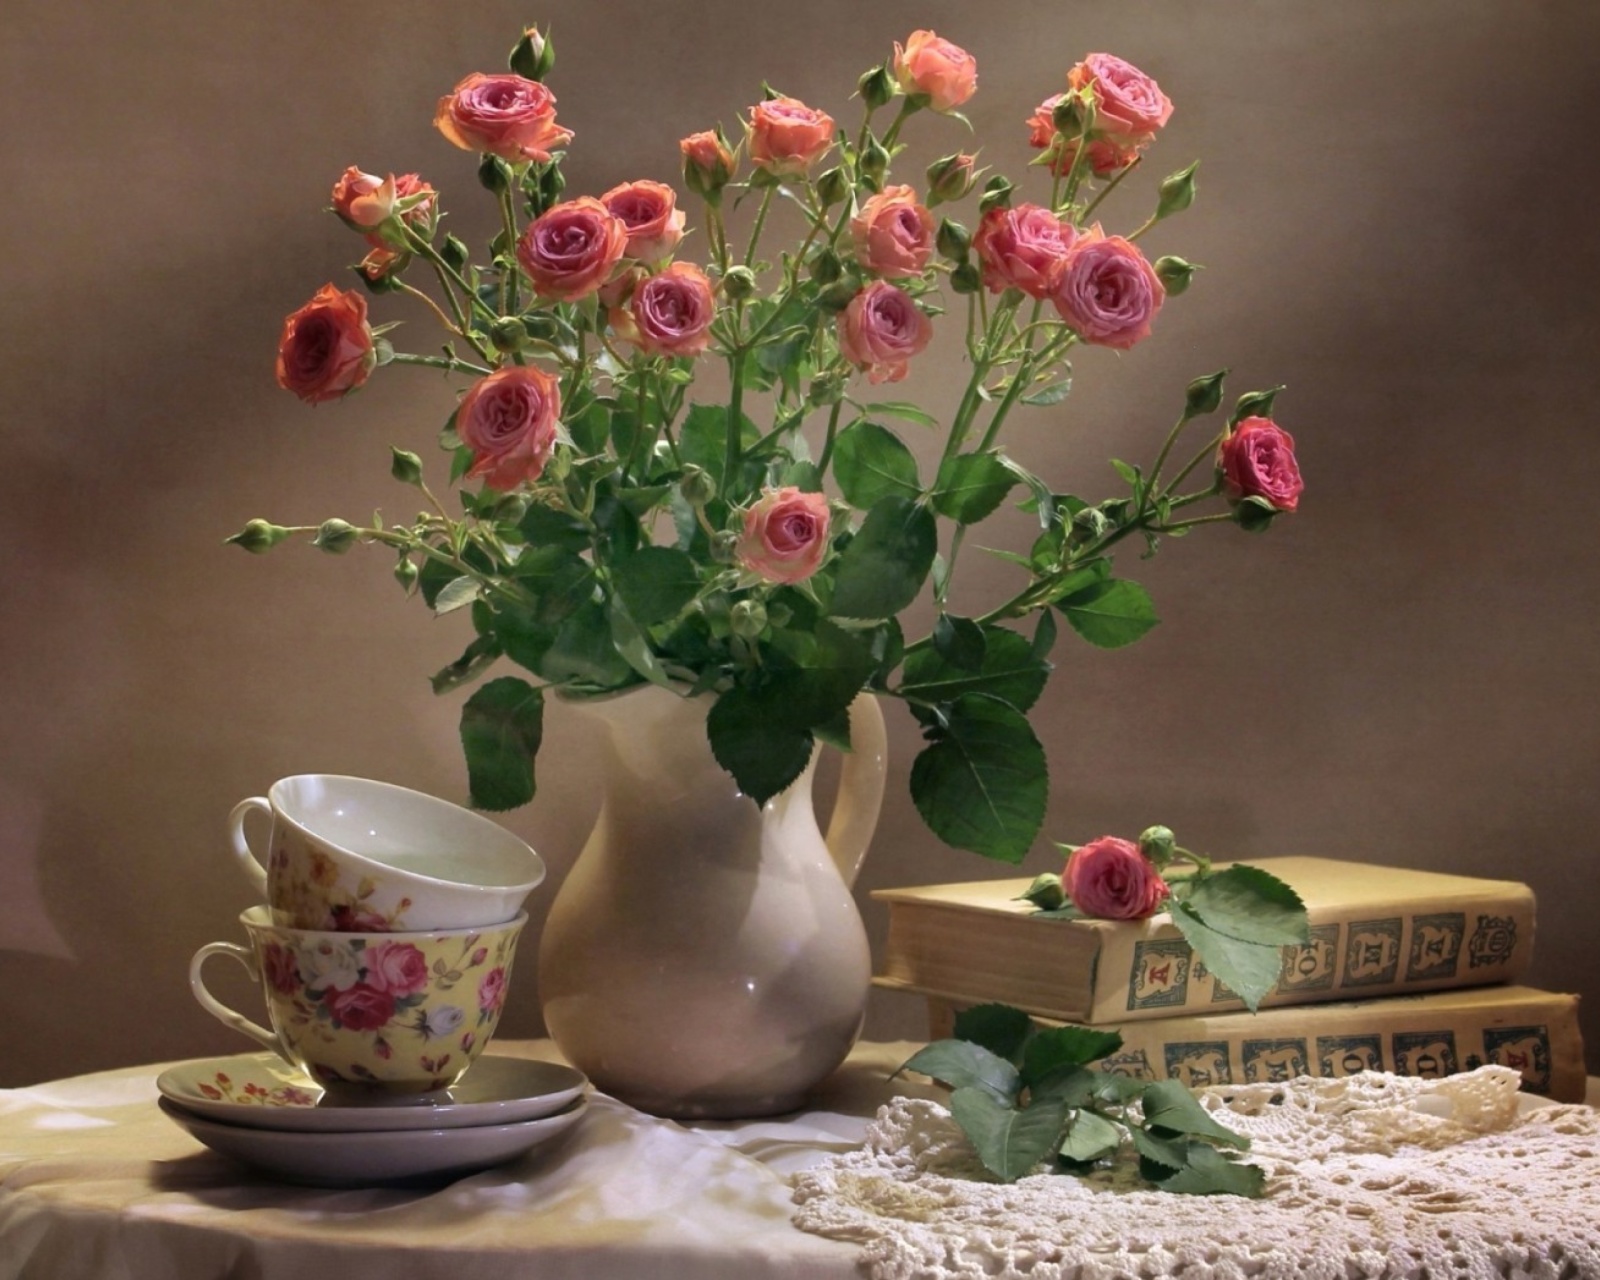 Still life of vintage books and roses screenshot #1 1600x1280